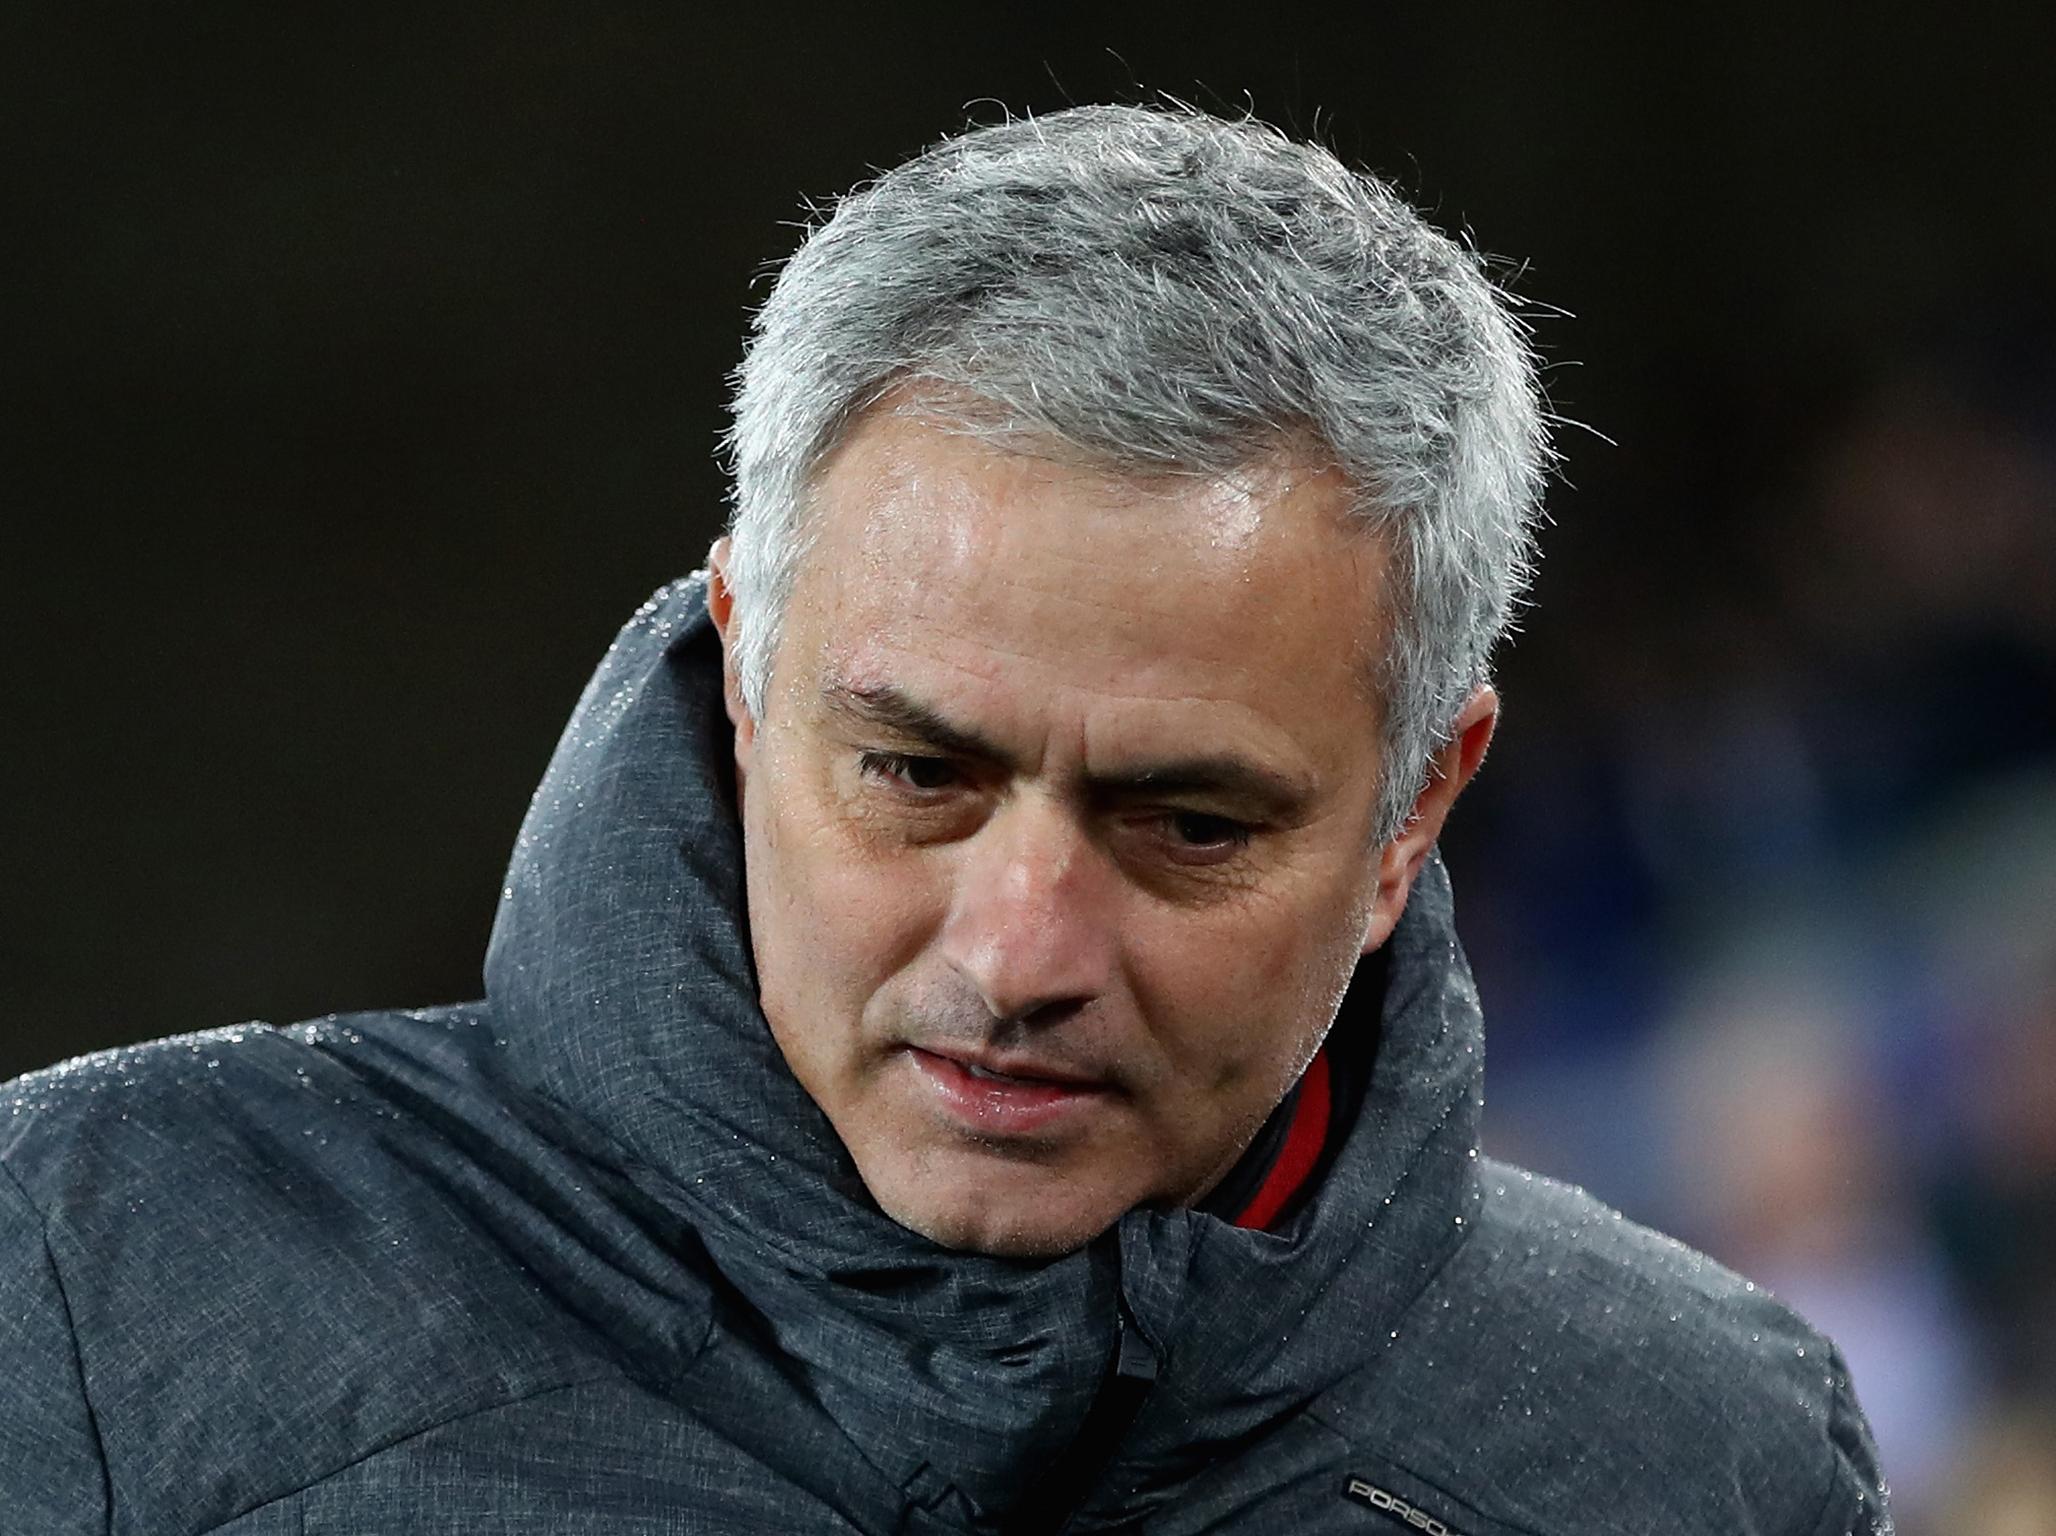 Jose Mourinho's recent behaviour has reportedly caused concern at Old Trafford